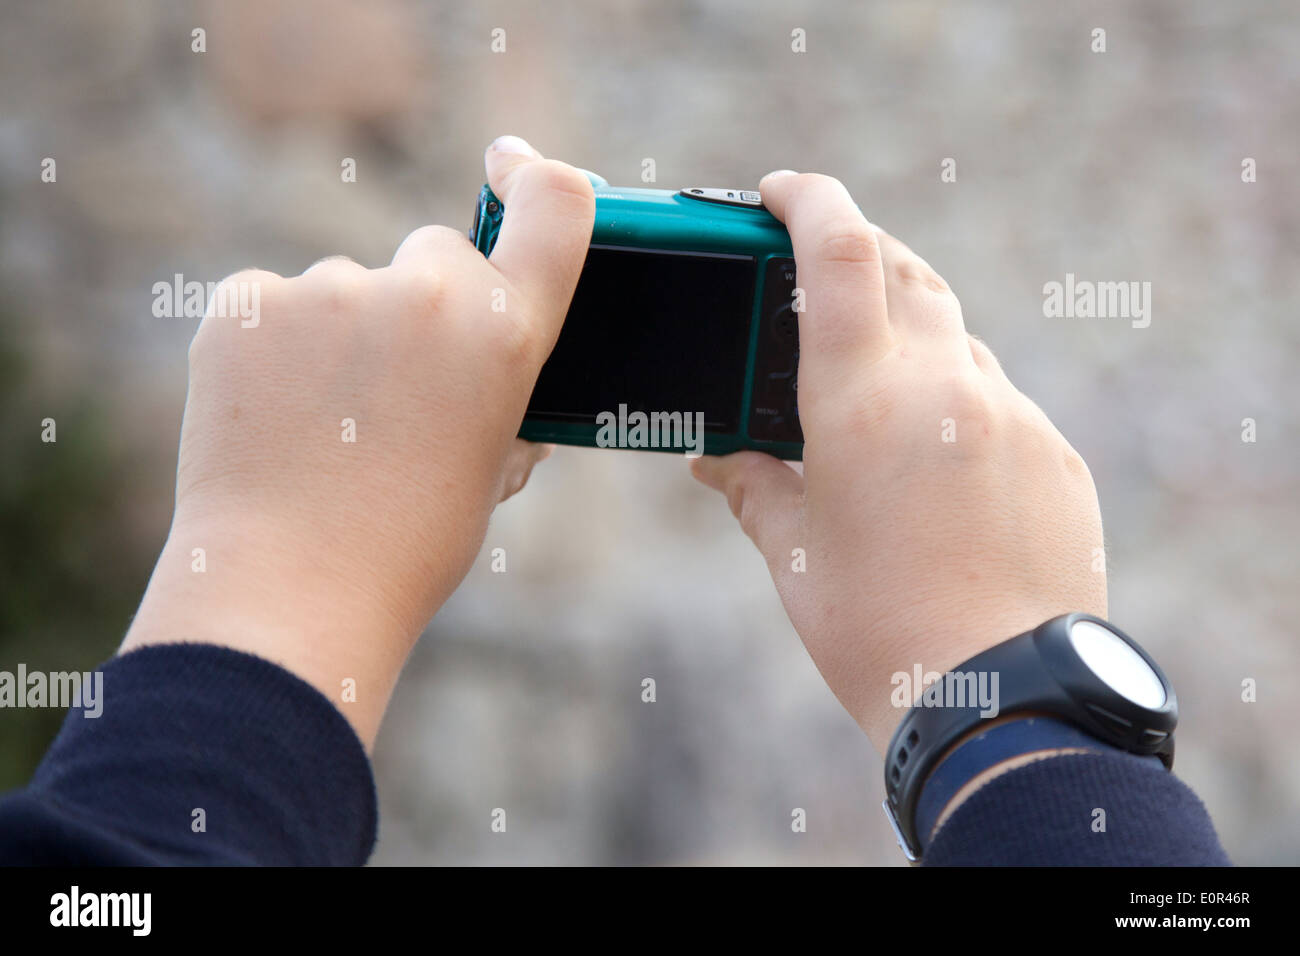 Hands taking a picture with a point and shoot camera. Stock Photo